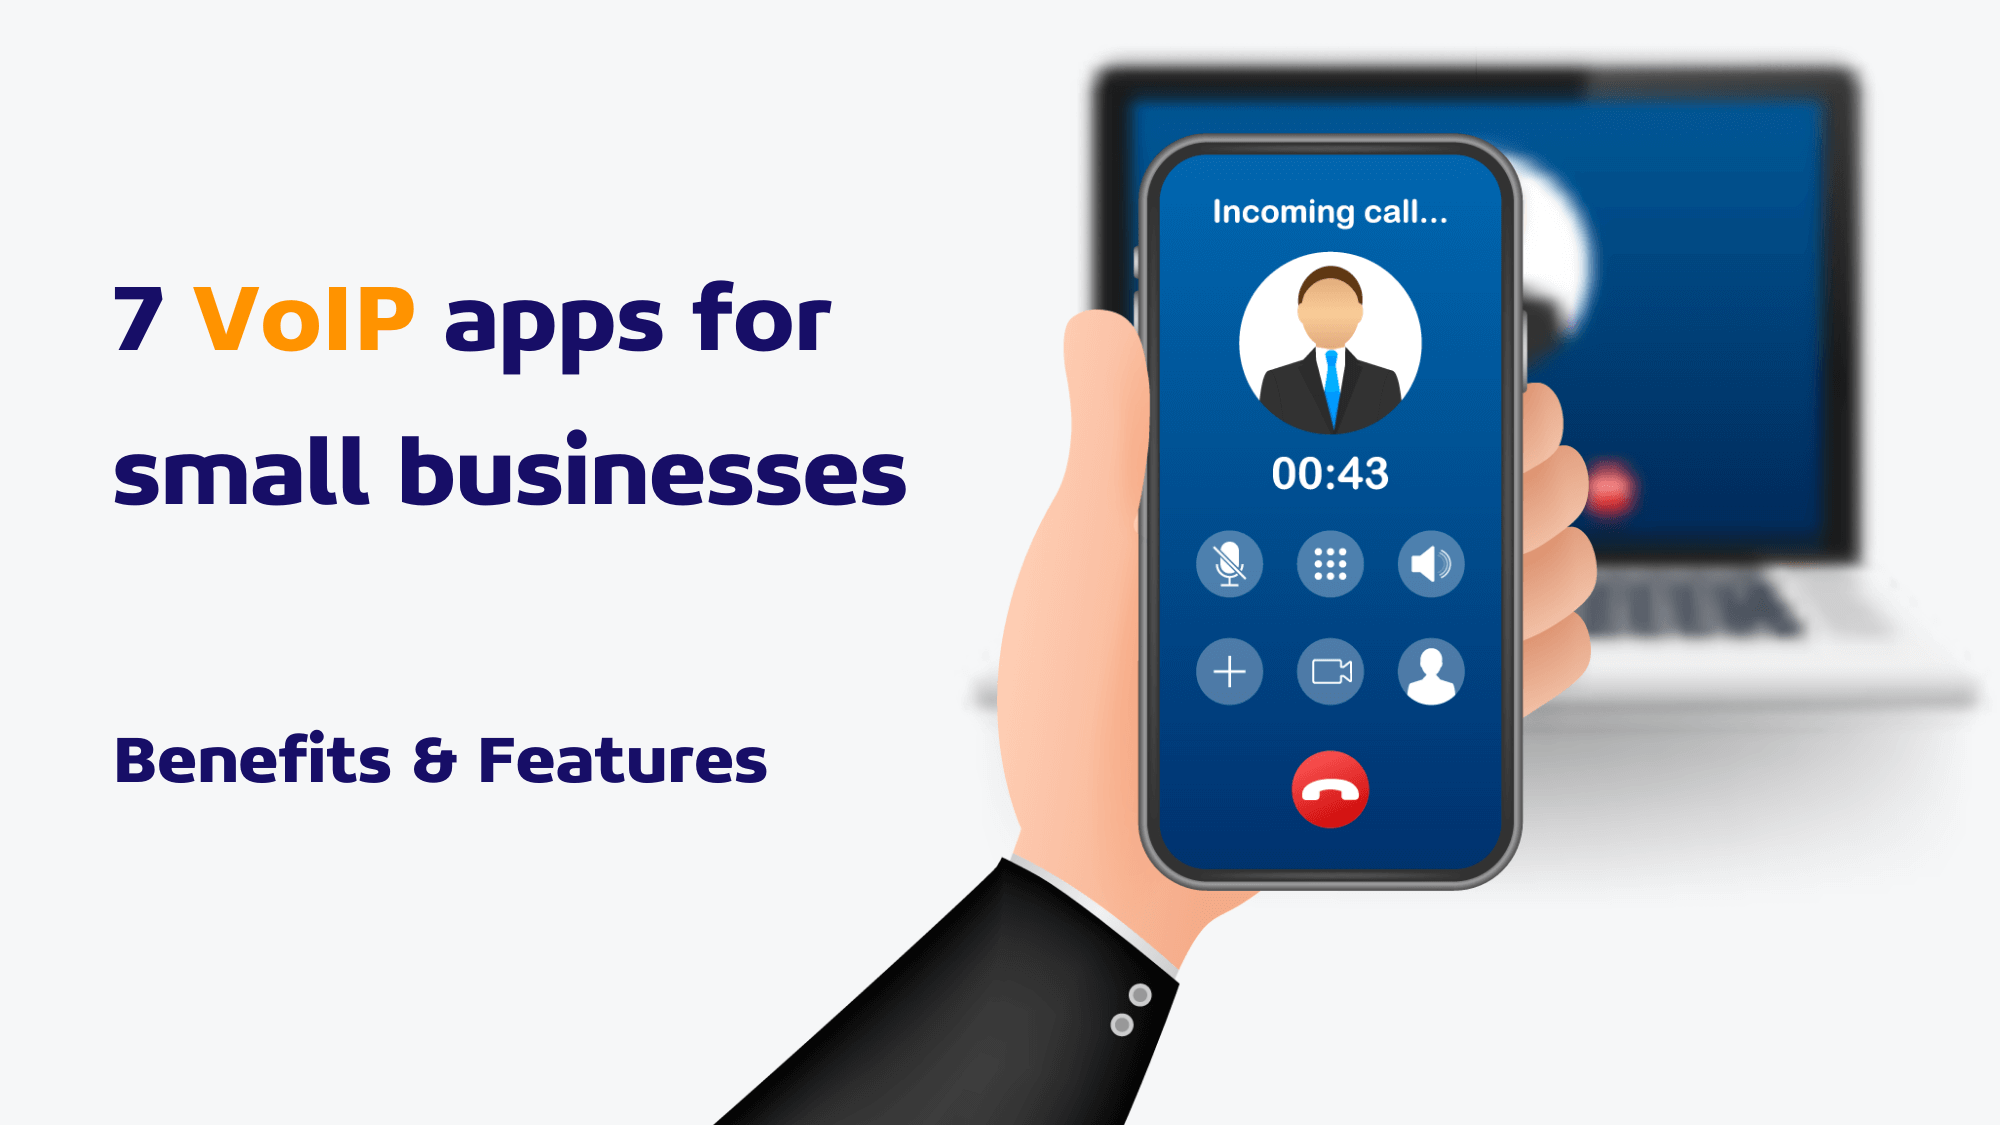 7 VoIP apps for small businesses | Benefits & Features